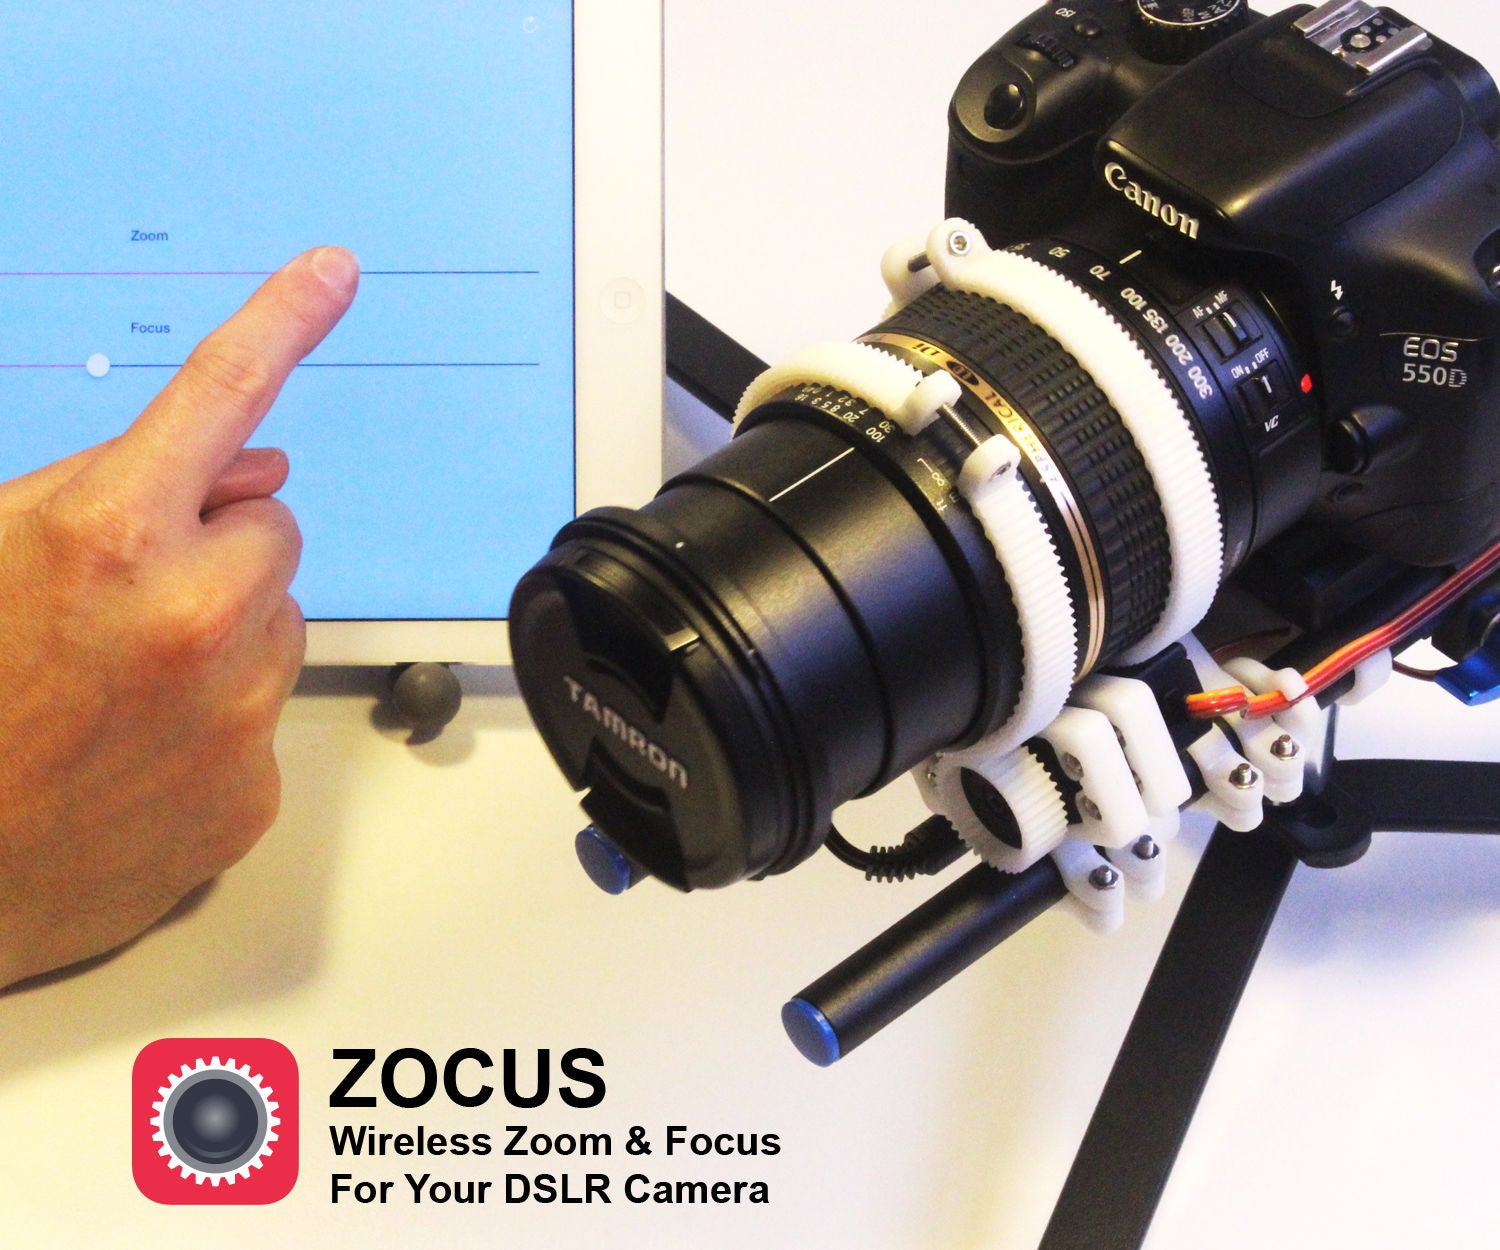 Zocus - Wireless Zoom & Focus for Your DSLR Camera